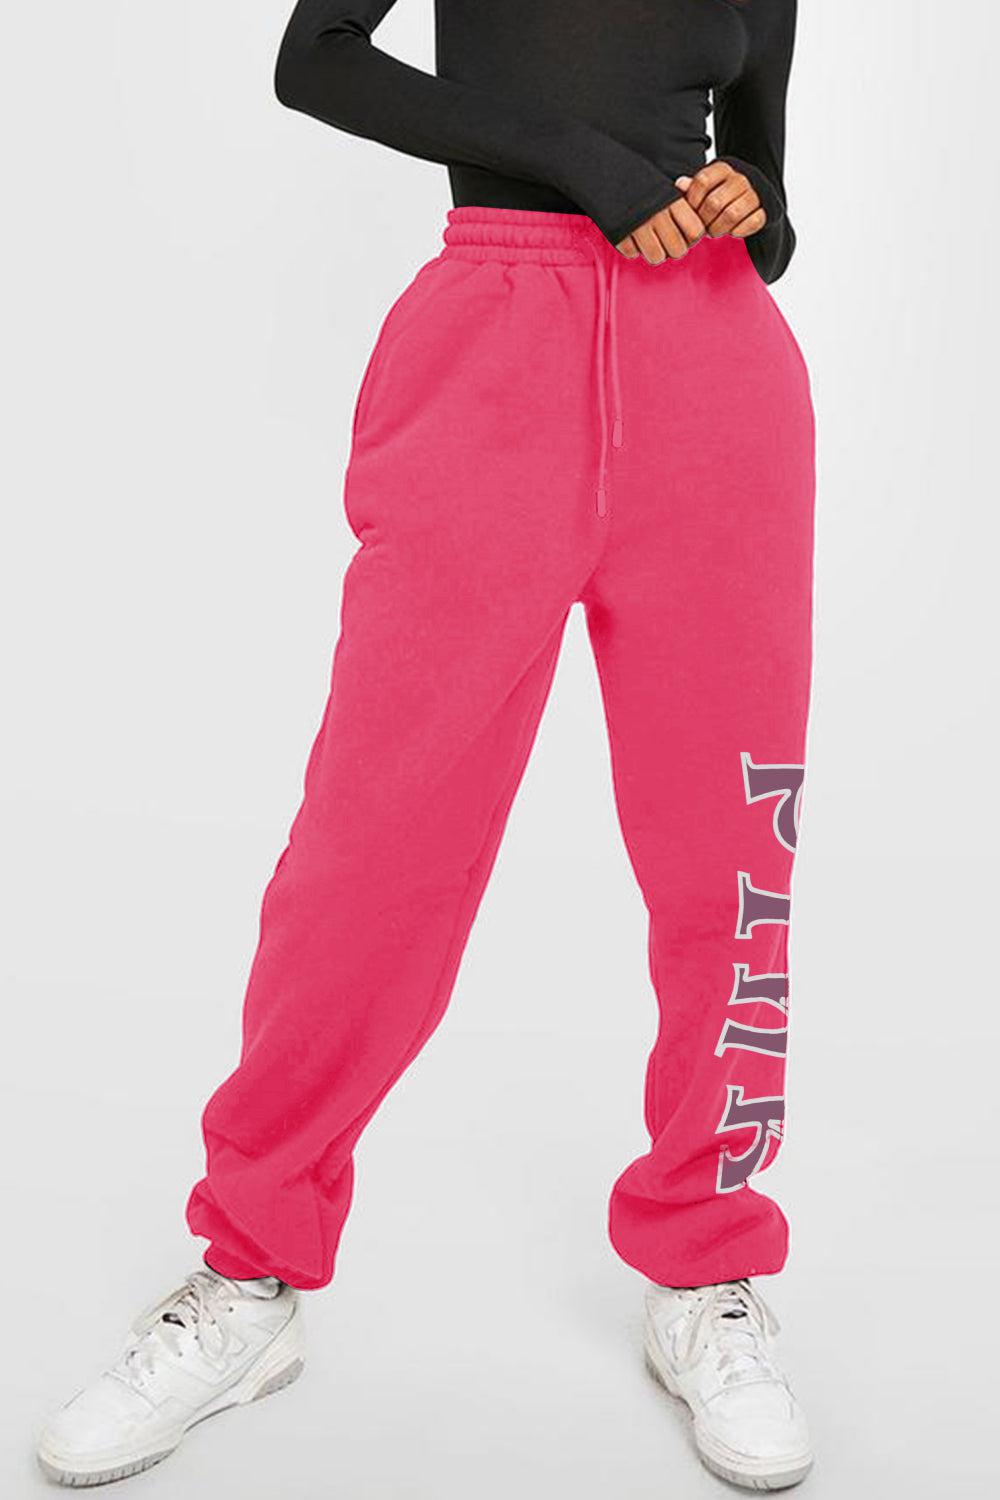 Simply Love Full Size PINK Graphic Sweatpants - Blue Zone Planet